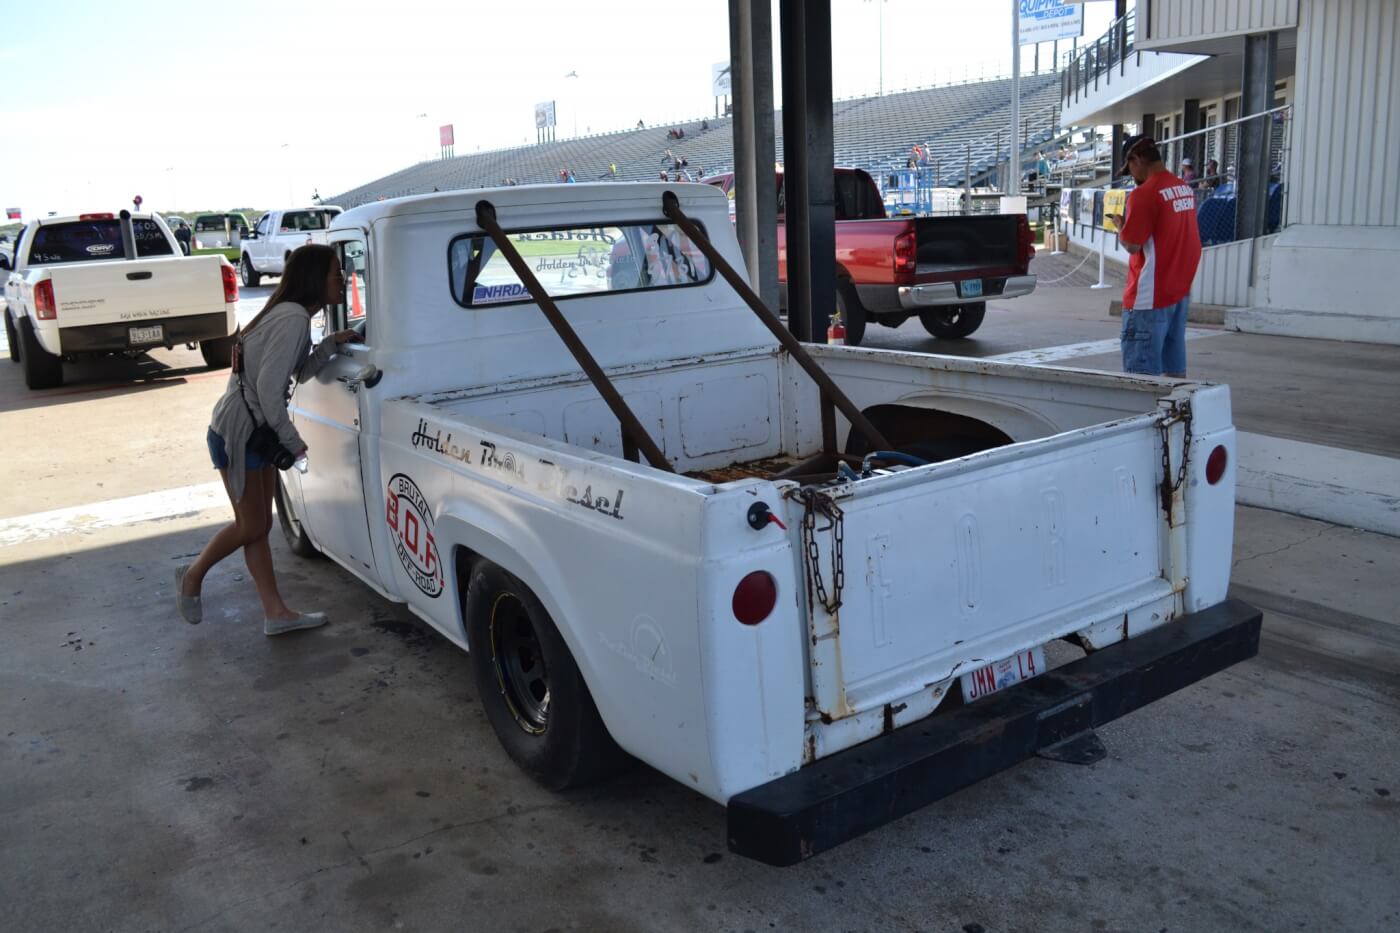 In the Sportsman bracket class, virtually anything and everything could be seen headed down the strip, like this cool old Cummins-powered Ford.